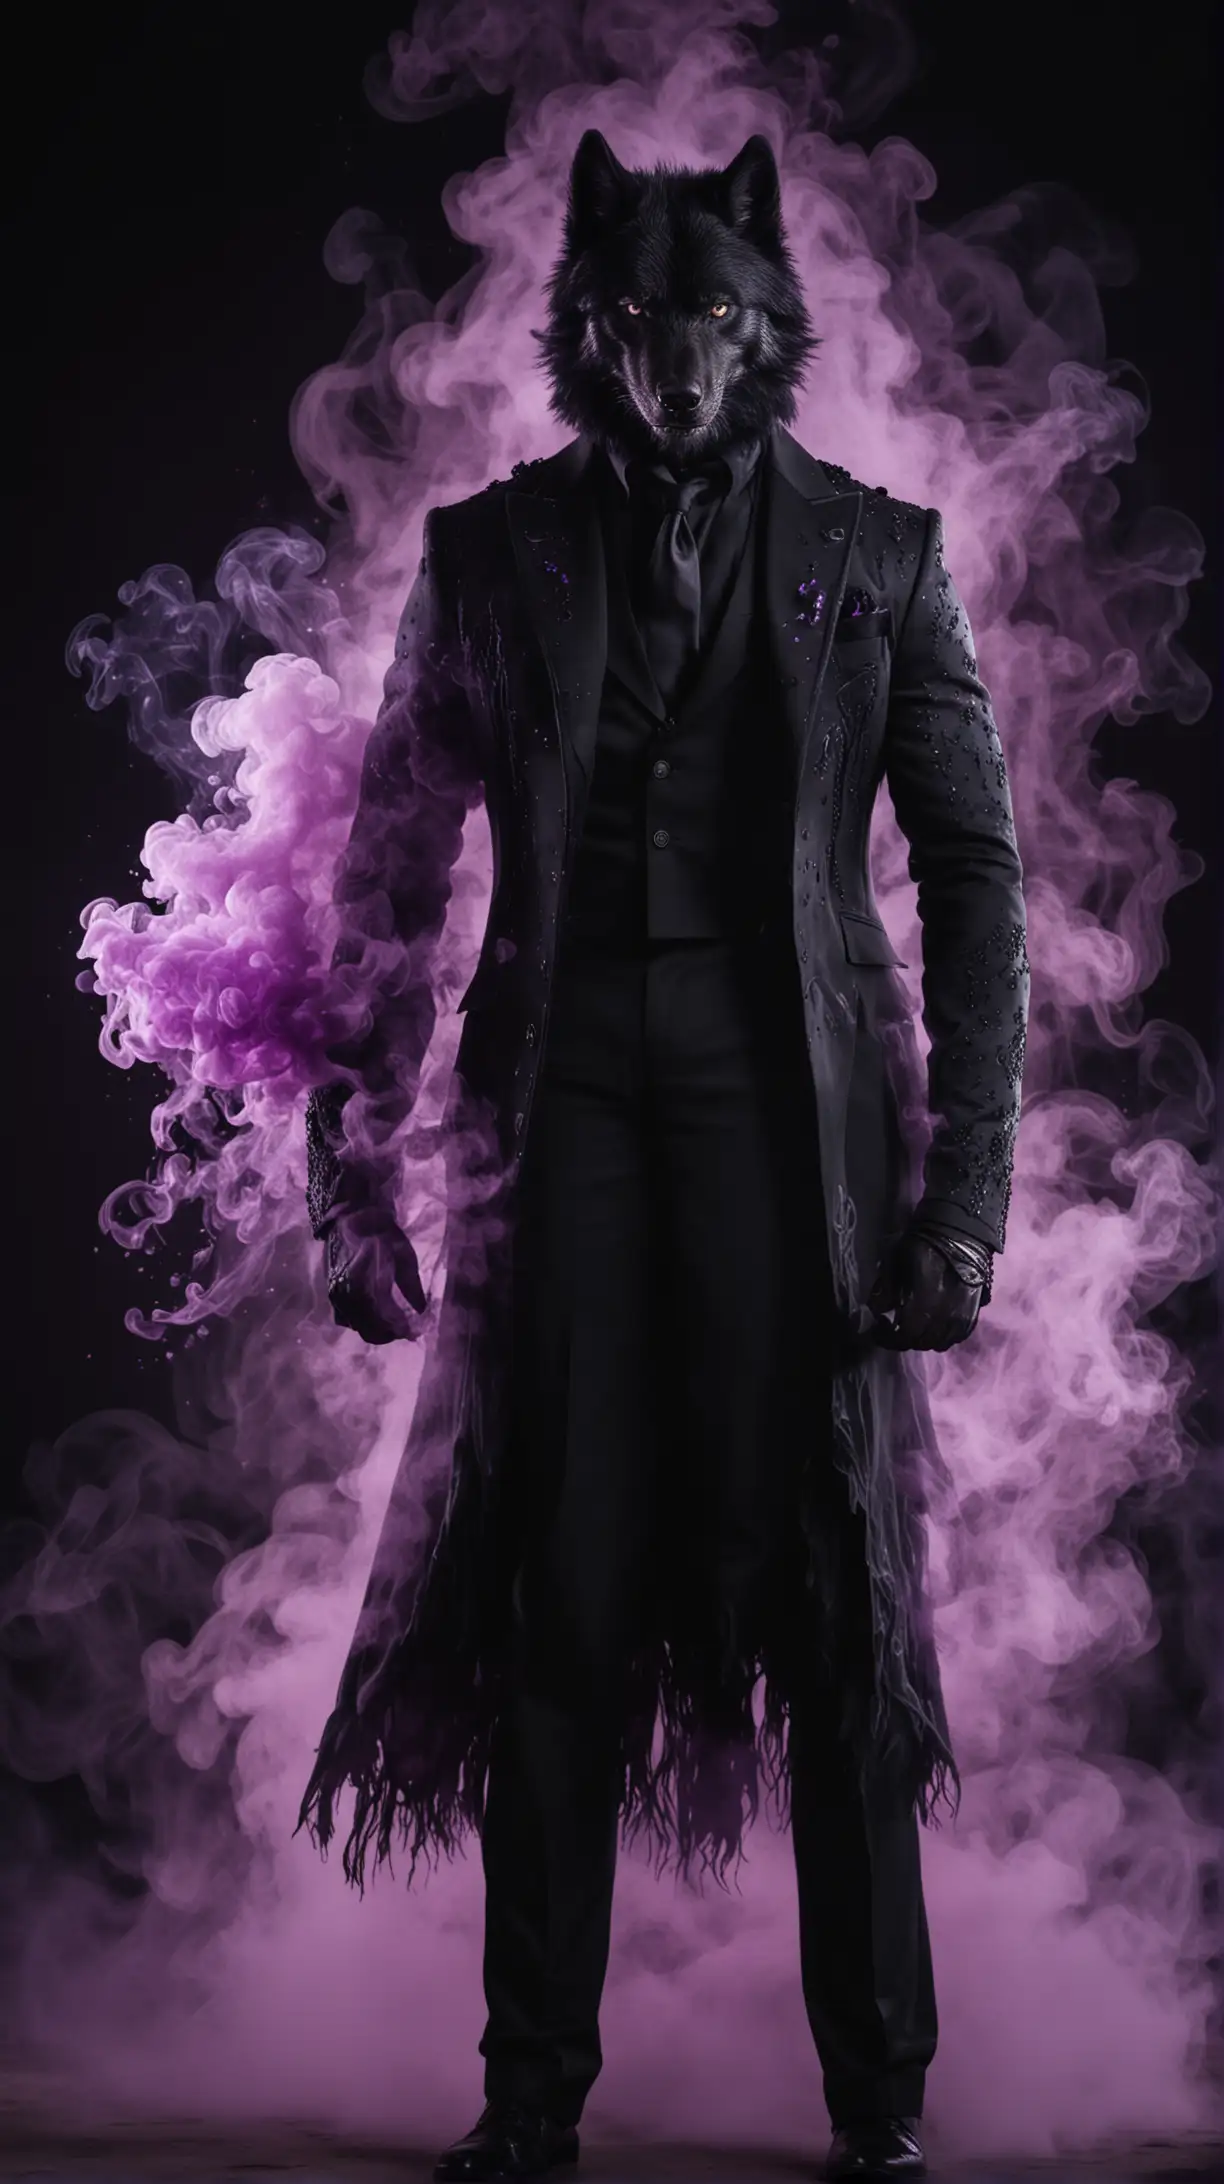 Mysterious Man in Black Royal Suit Surrounded by Purple Luminous Smoke with Black Wolf Companion